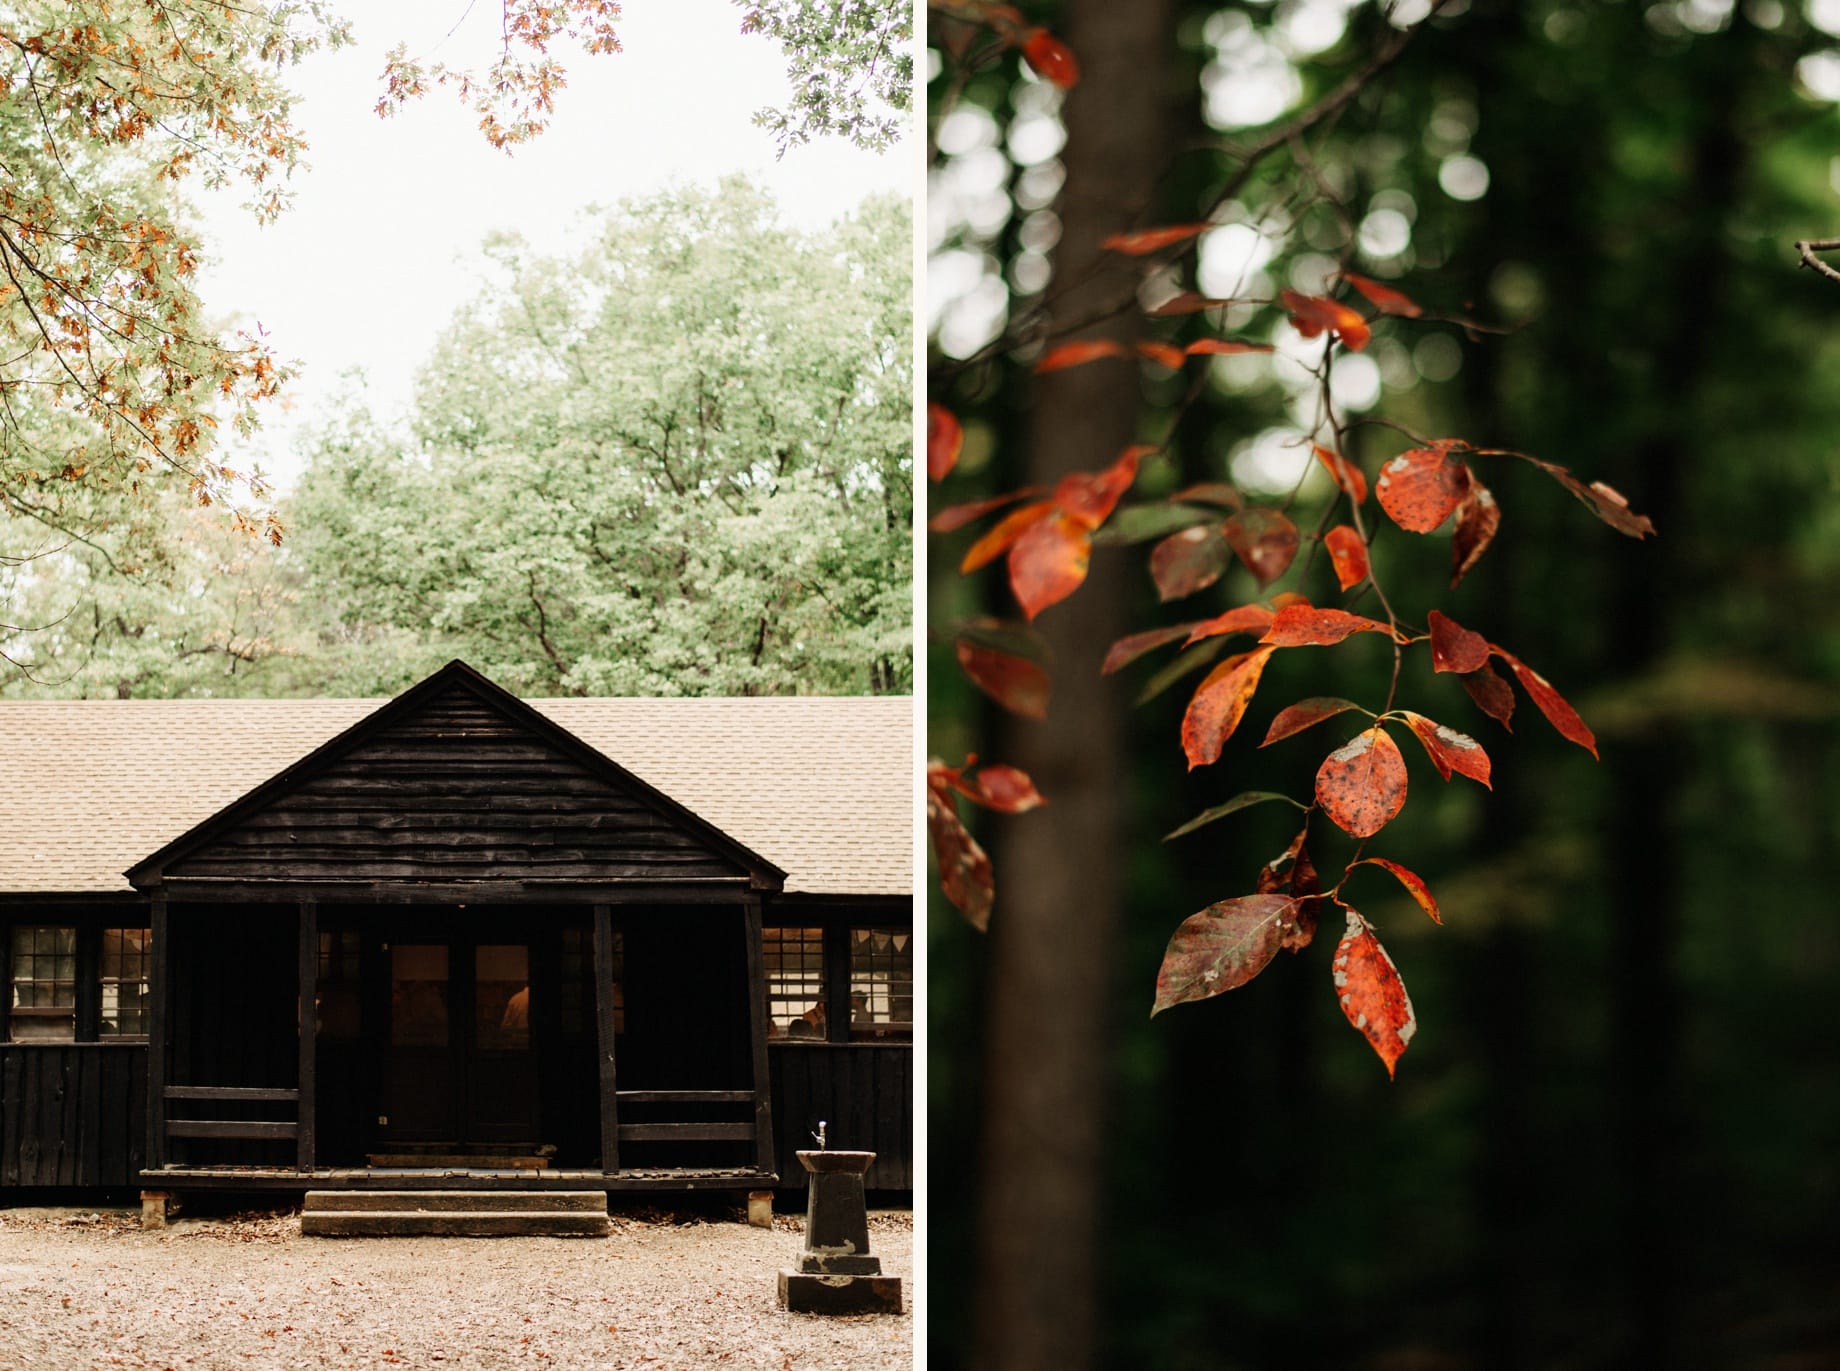 Exterior shots of outbuildings at Prince William Forest Park